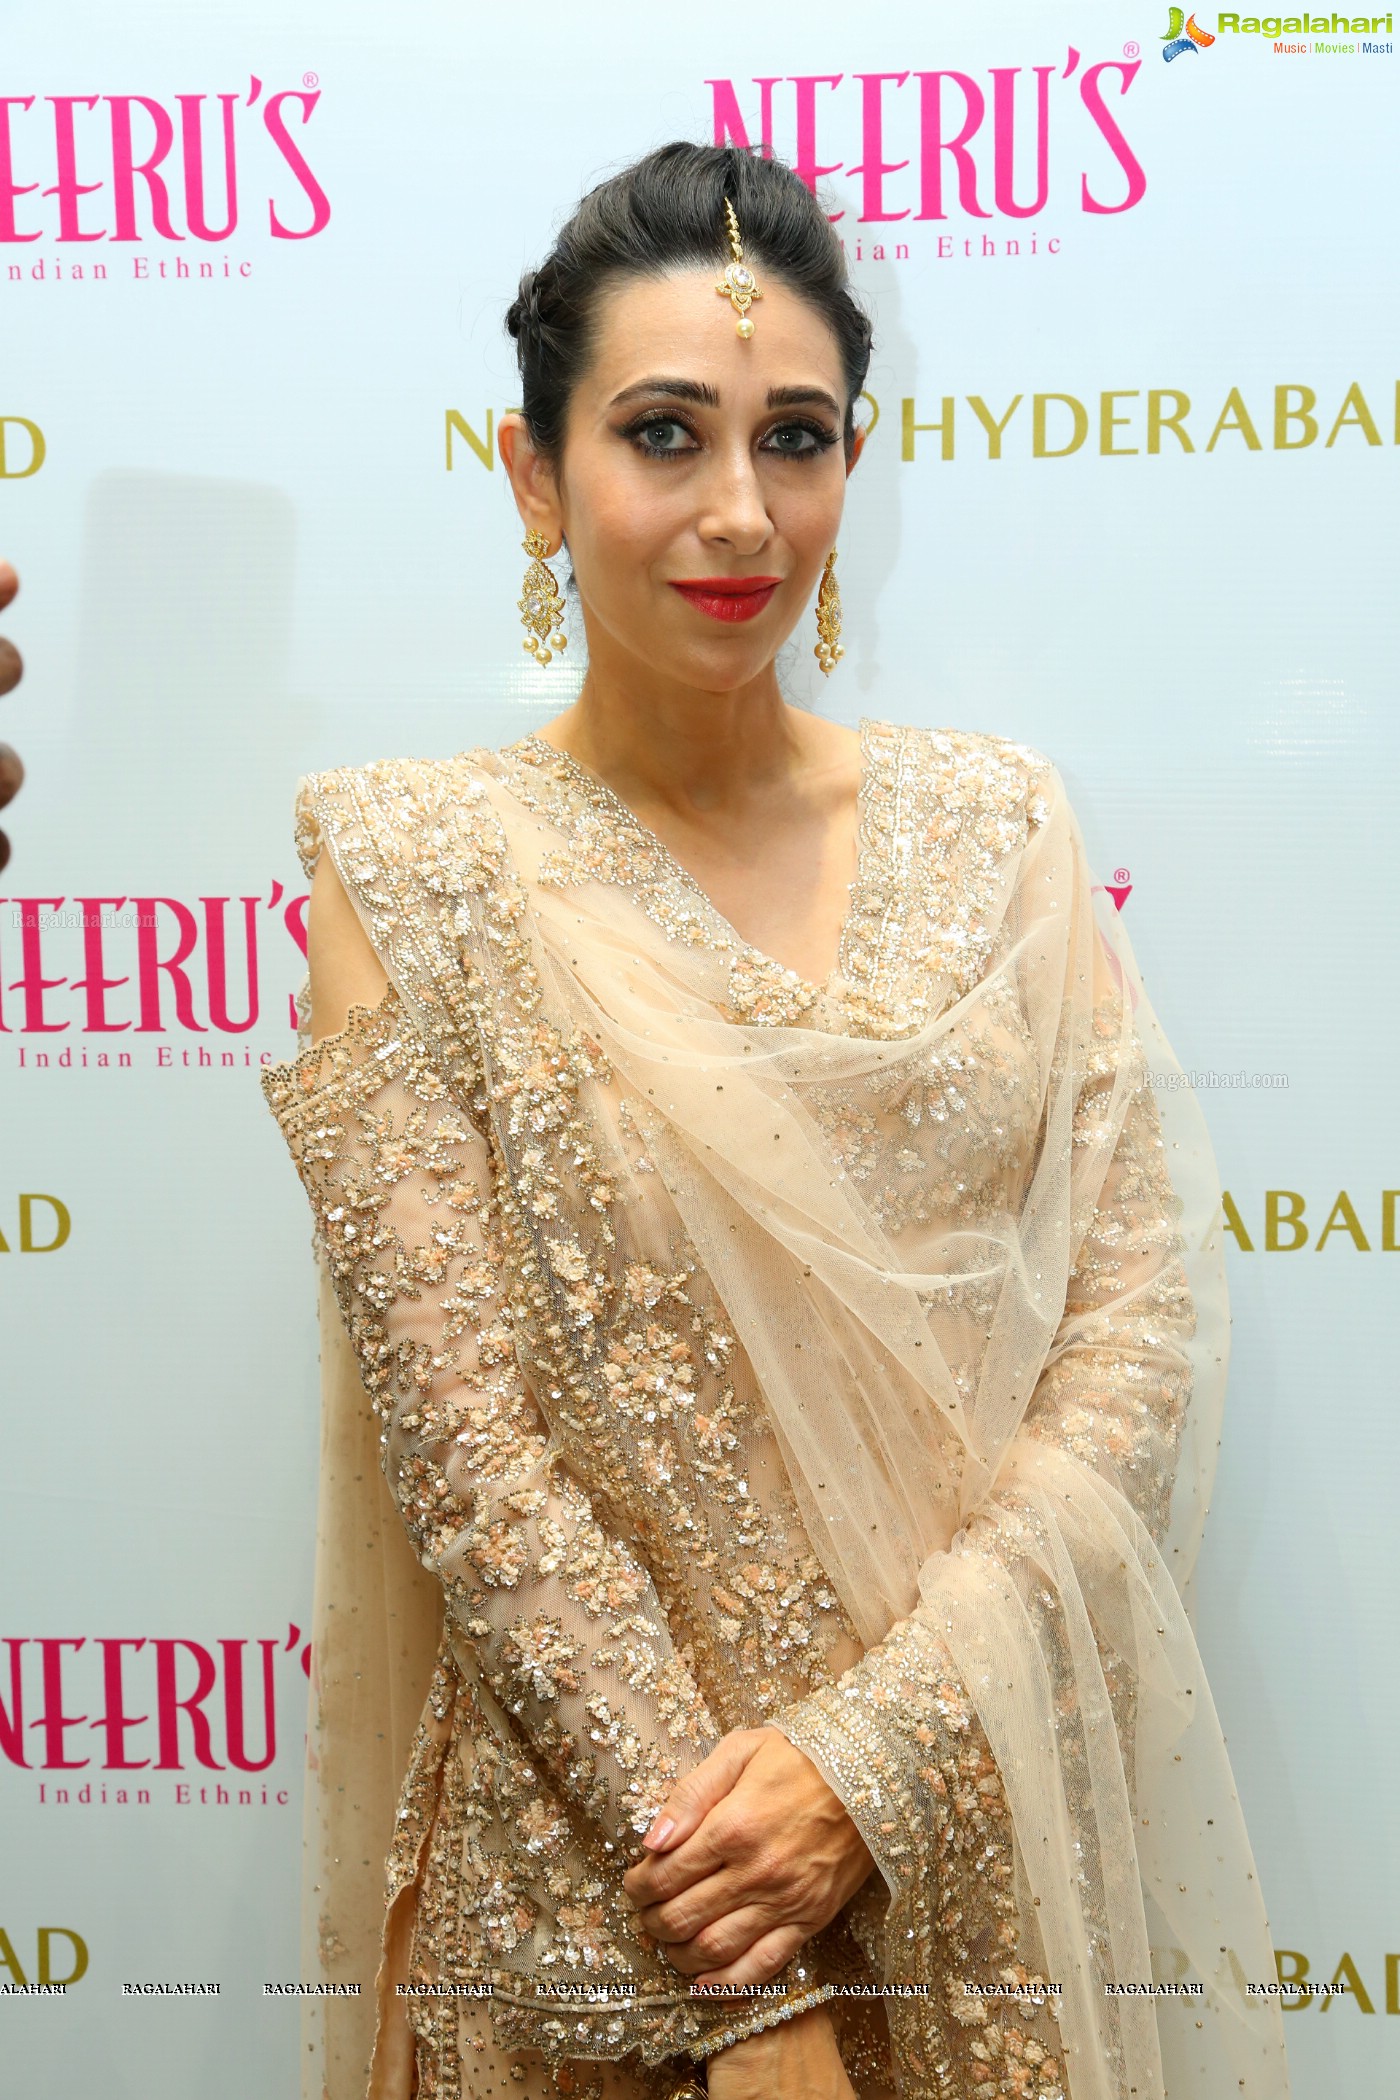 Karisma Kapoor at Neeru's 50th Store Launch, Hyderabad (Posters)